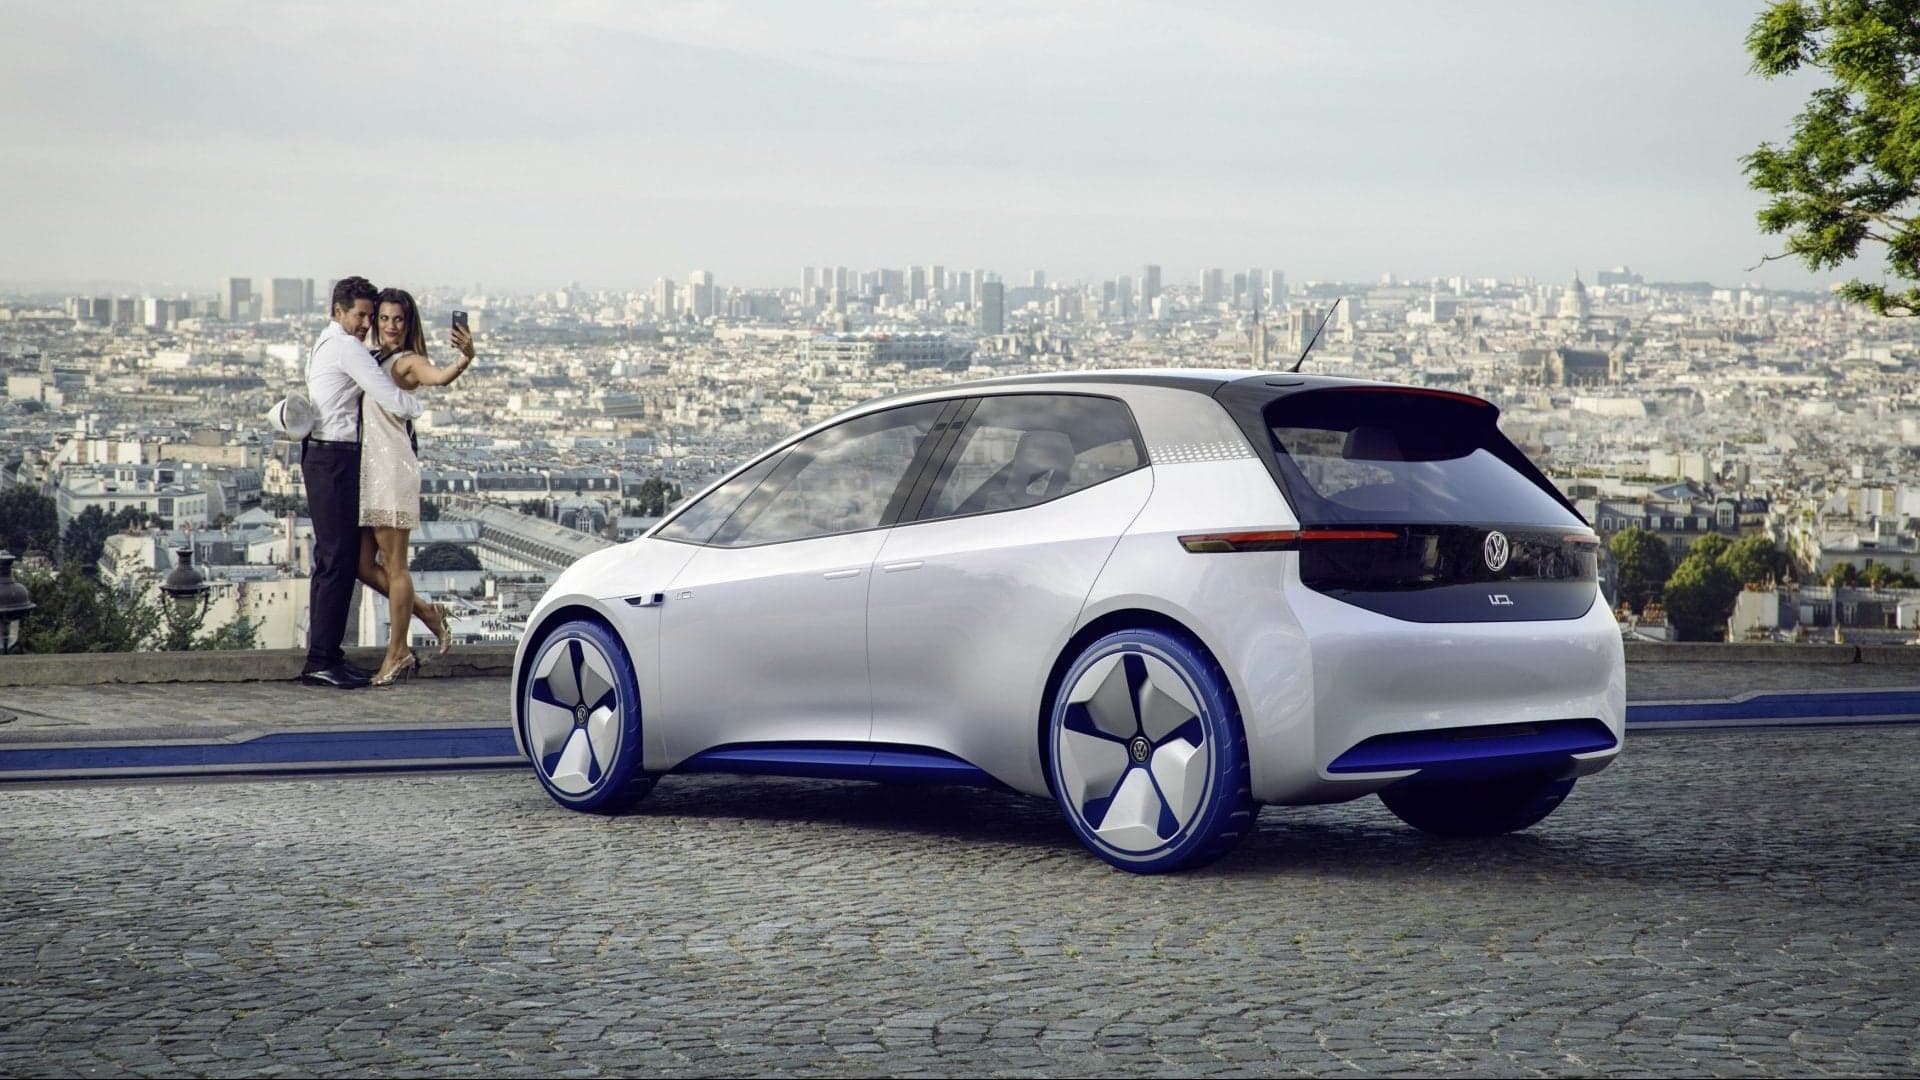 What to Expect from Volkswagen’s I.D. Electric Vehicle Brand